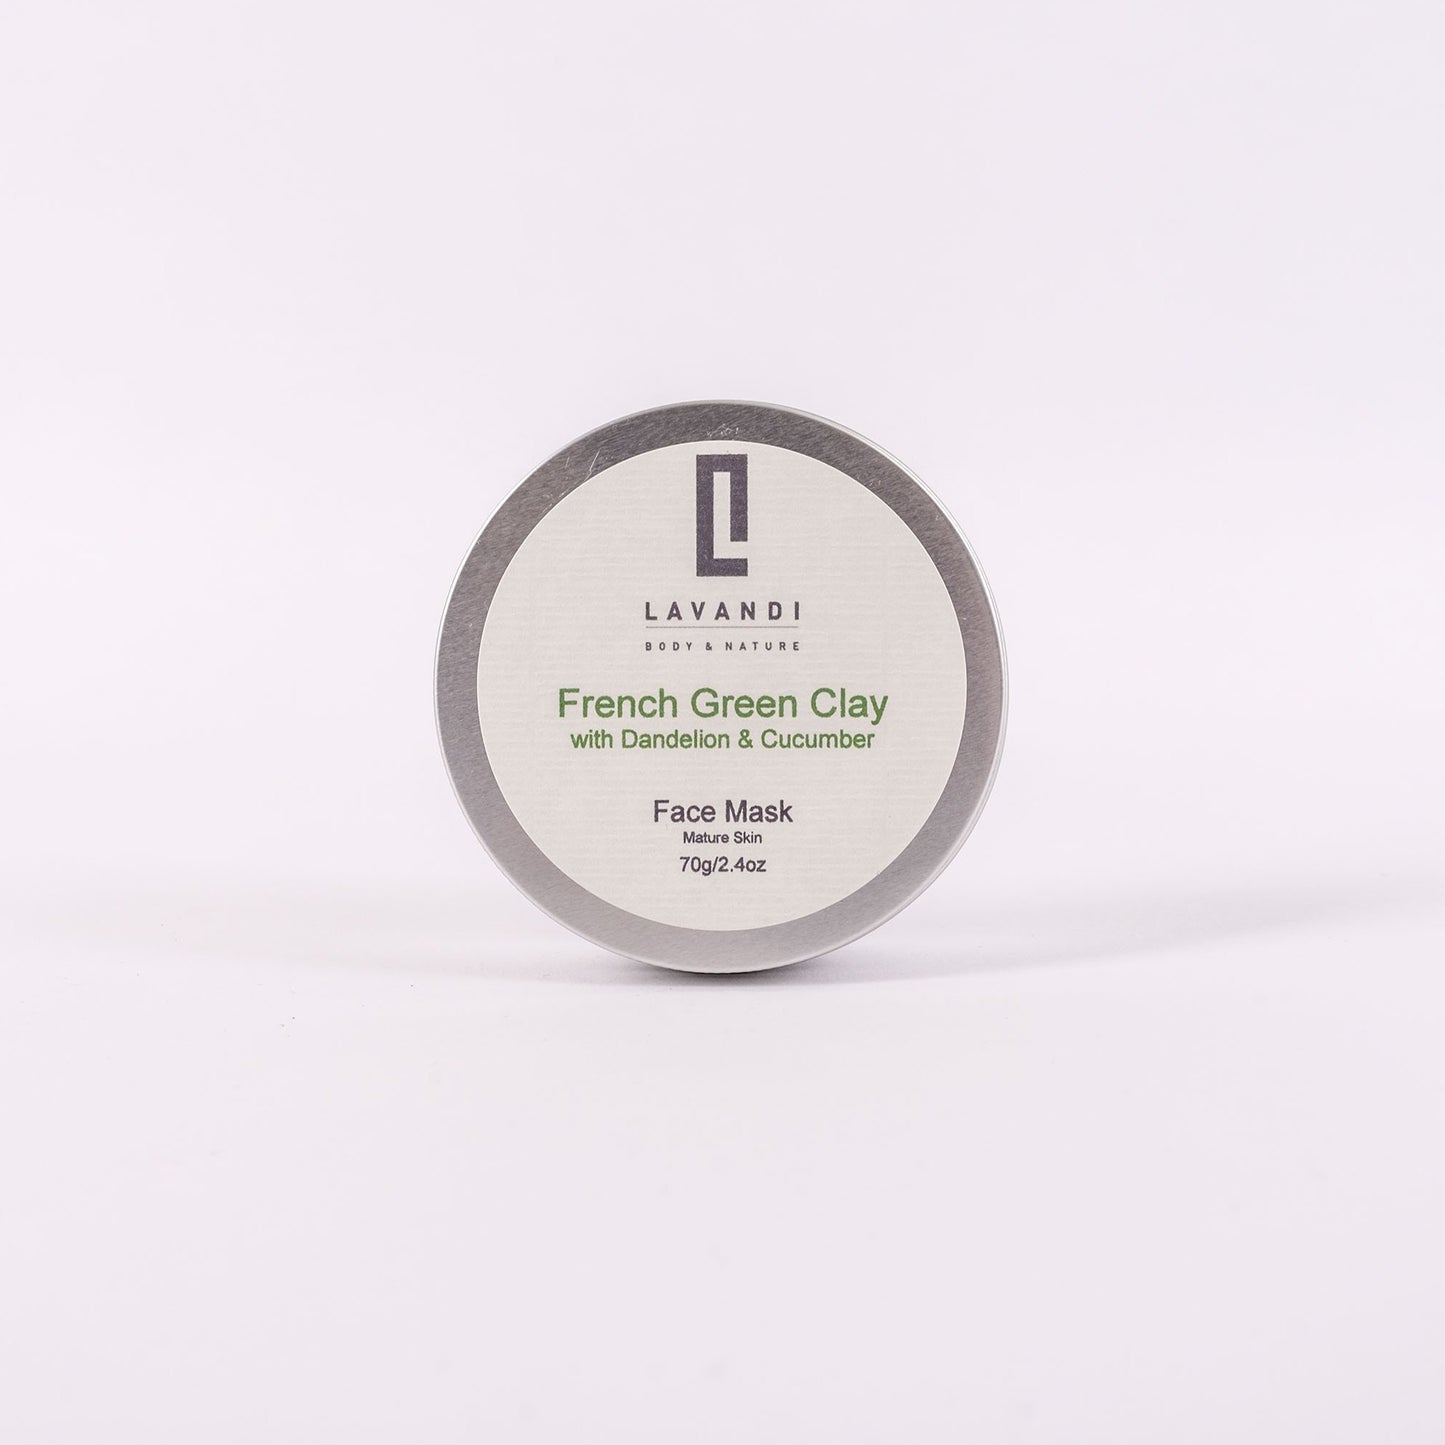 French Green Clay Face Mask with Dandelion & Cucumber